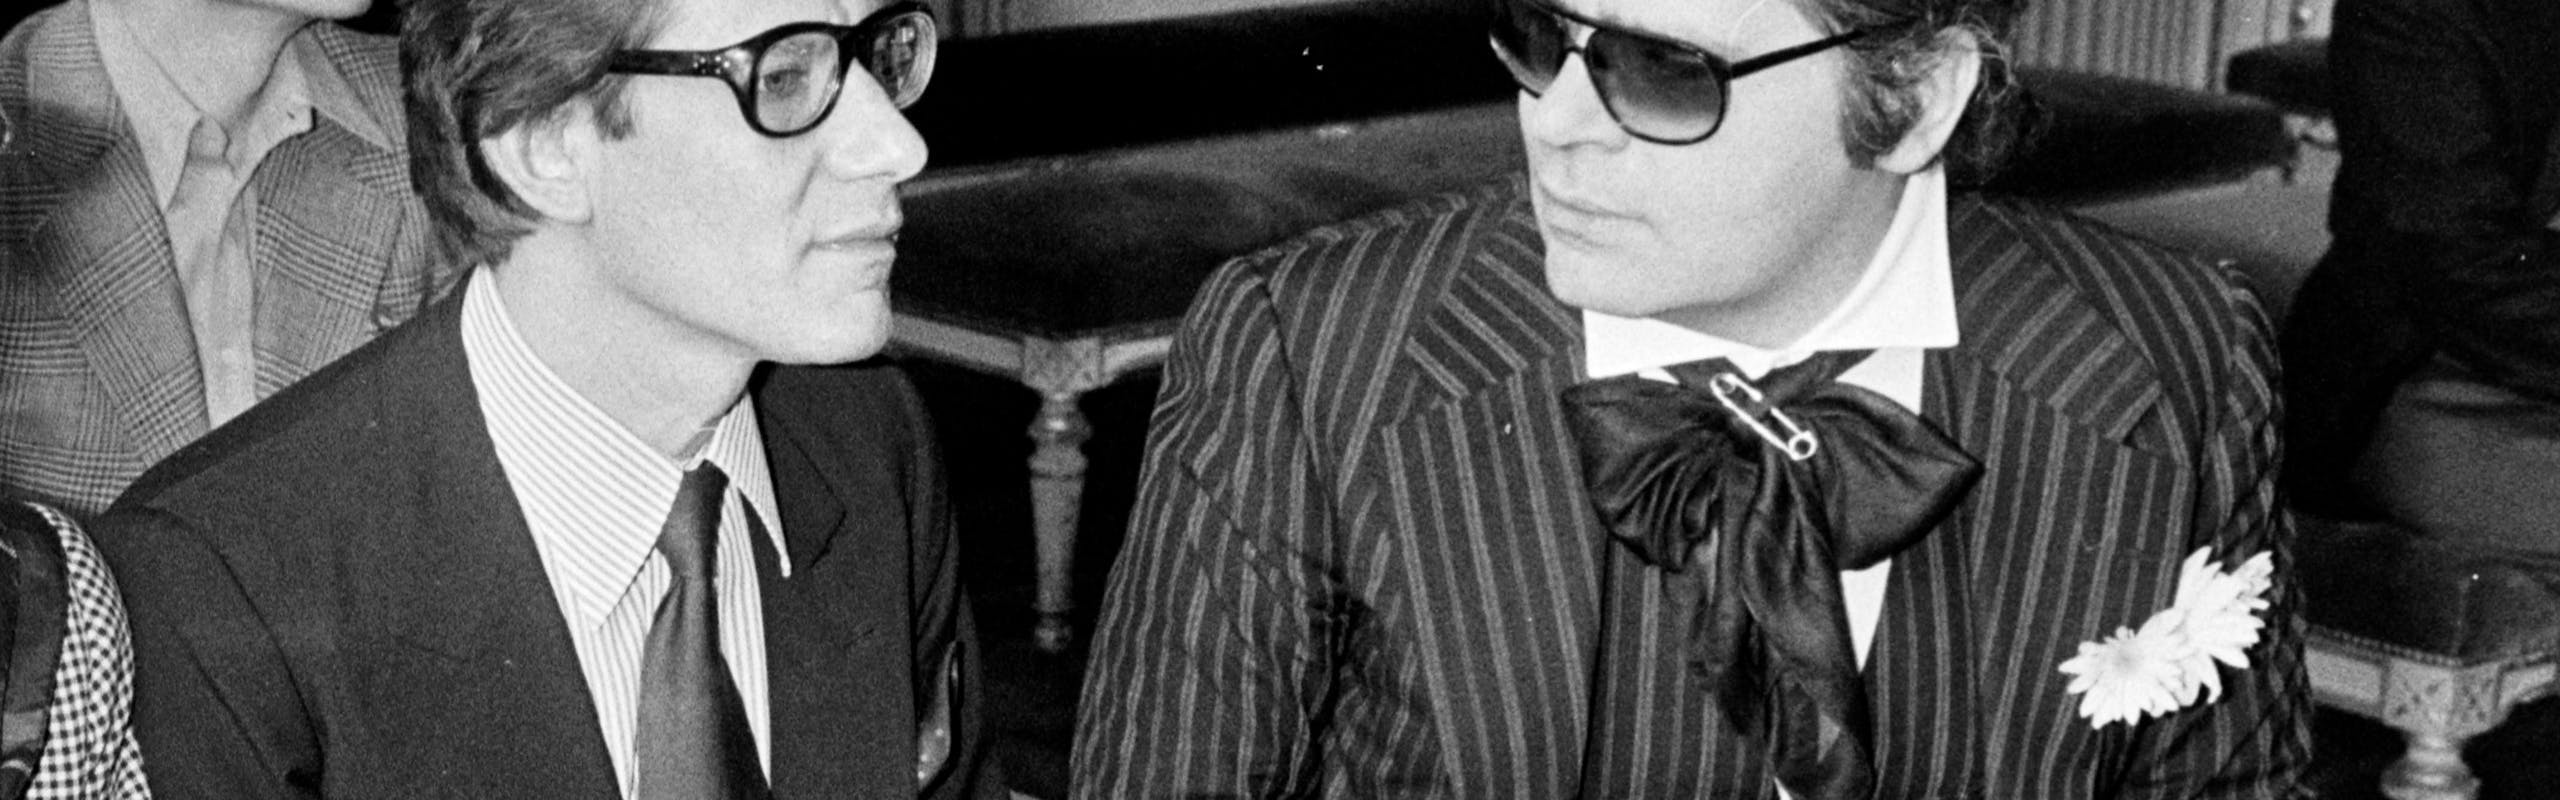 Portrait of Yves Saint Laurent and Karl Lagerfeld attending the wedding of Paloma Picasso and Rafael Lopez-Sanchez in Paris.